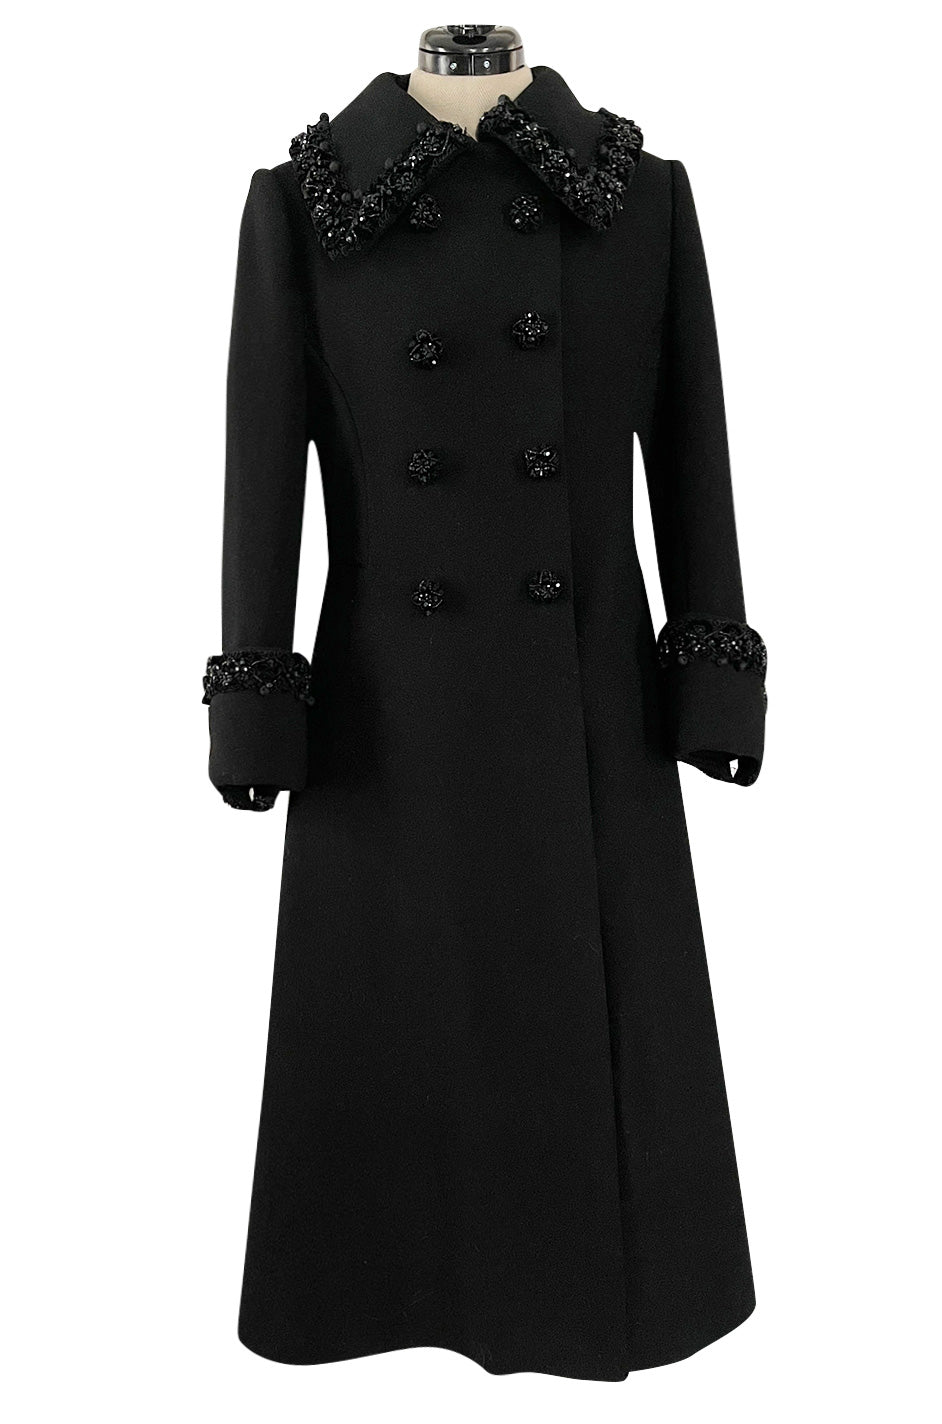 Glamorous 1960s Tailored Black Wool Coat w Densely Beaded Cuffs Collar ...